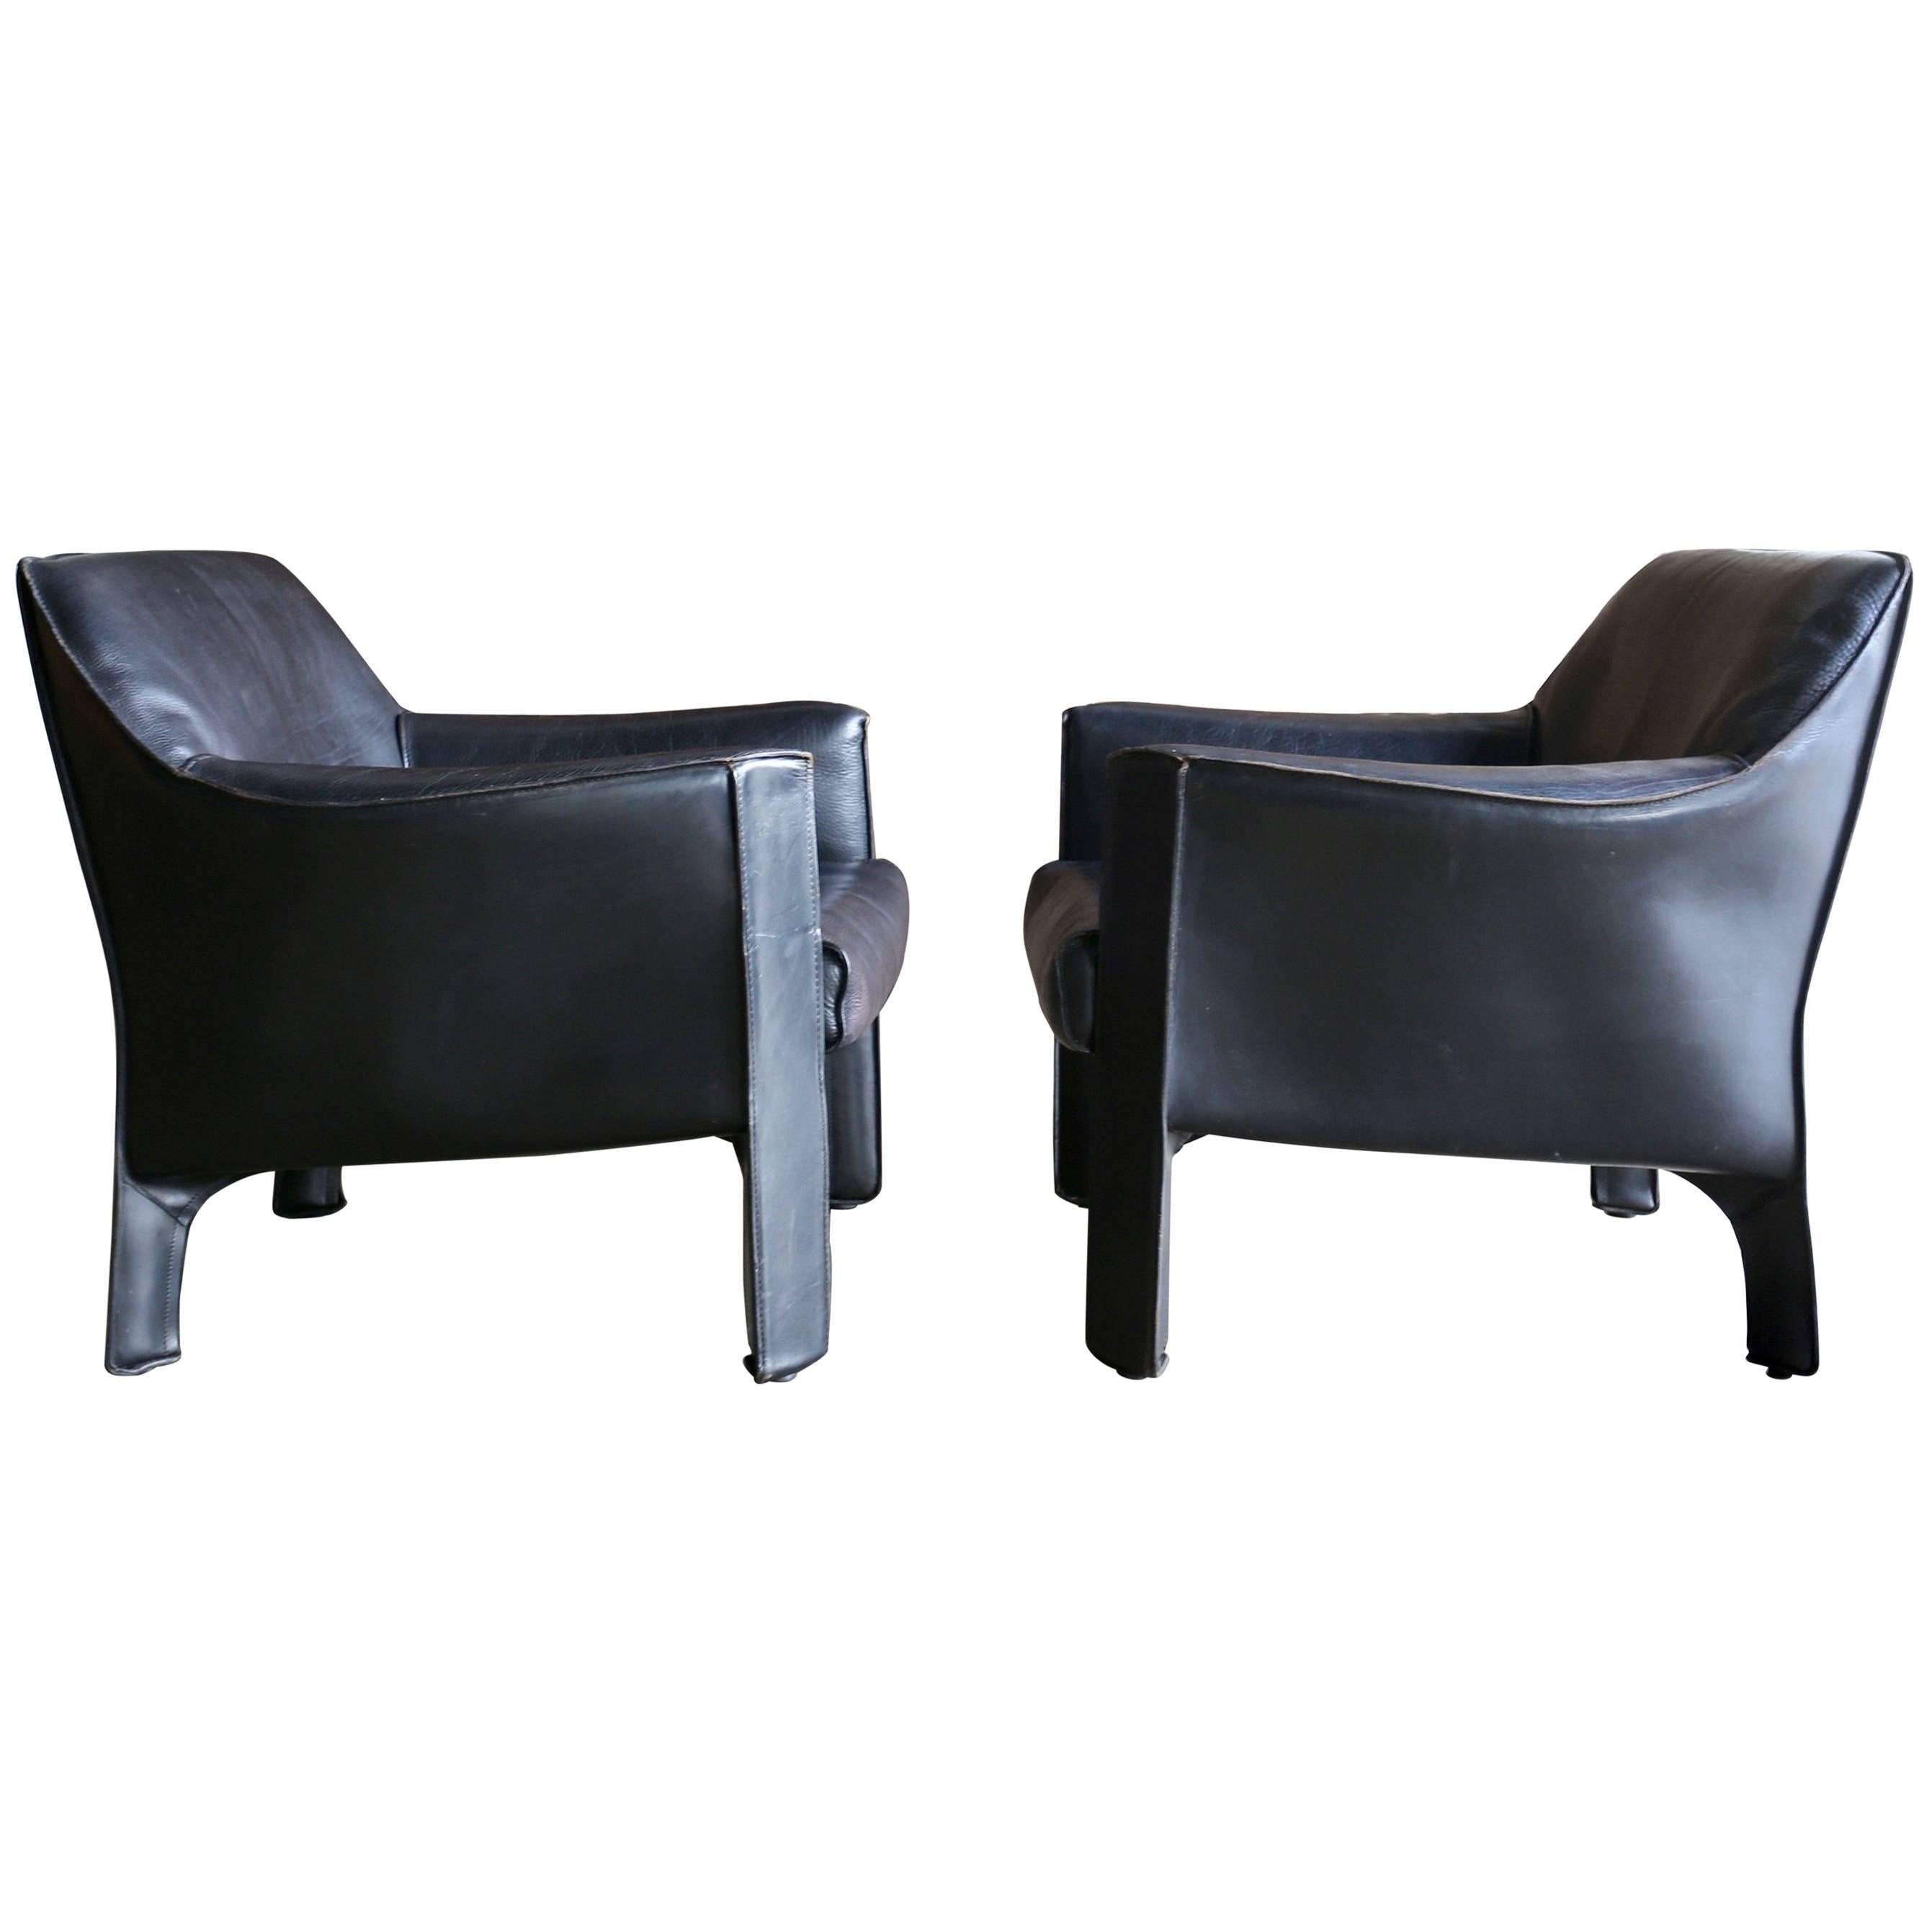 Pair of Large CAB Lounge Chairs by Mario Bellini for Cassina